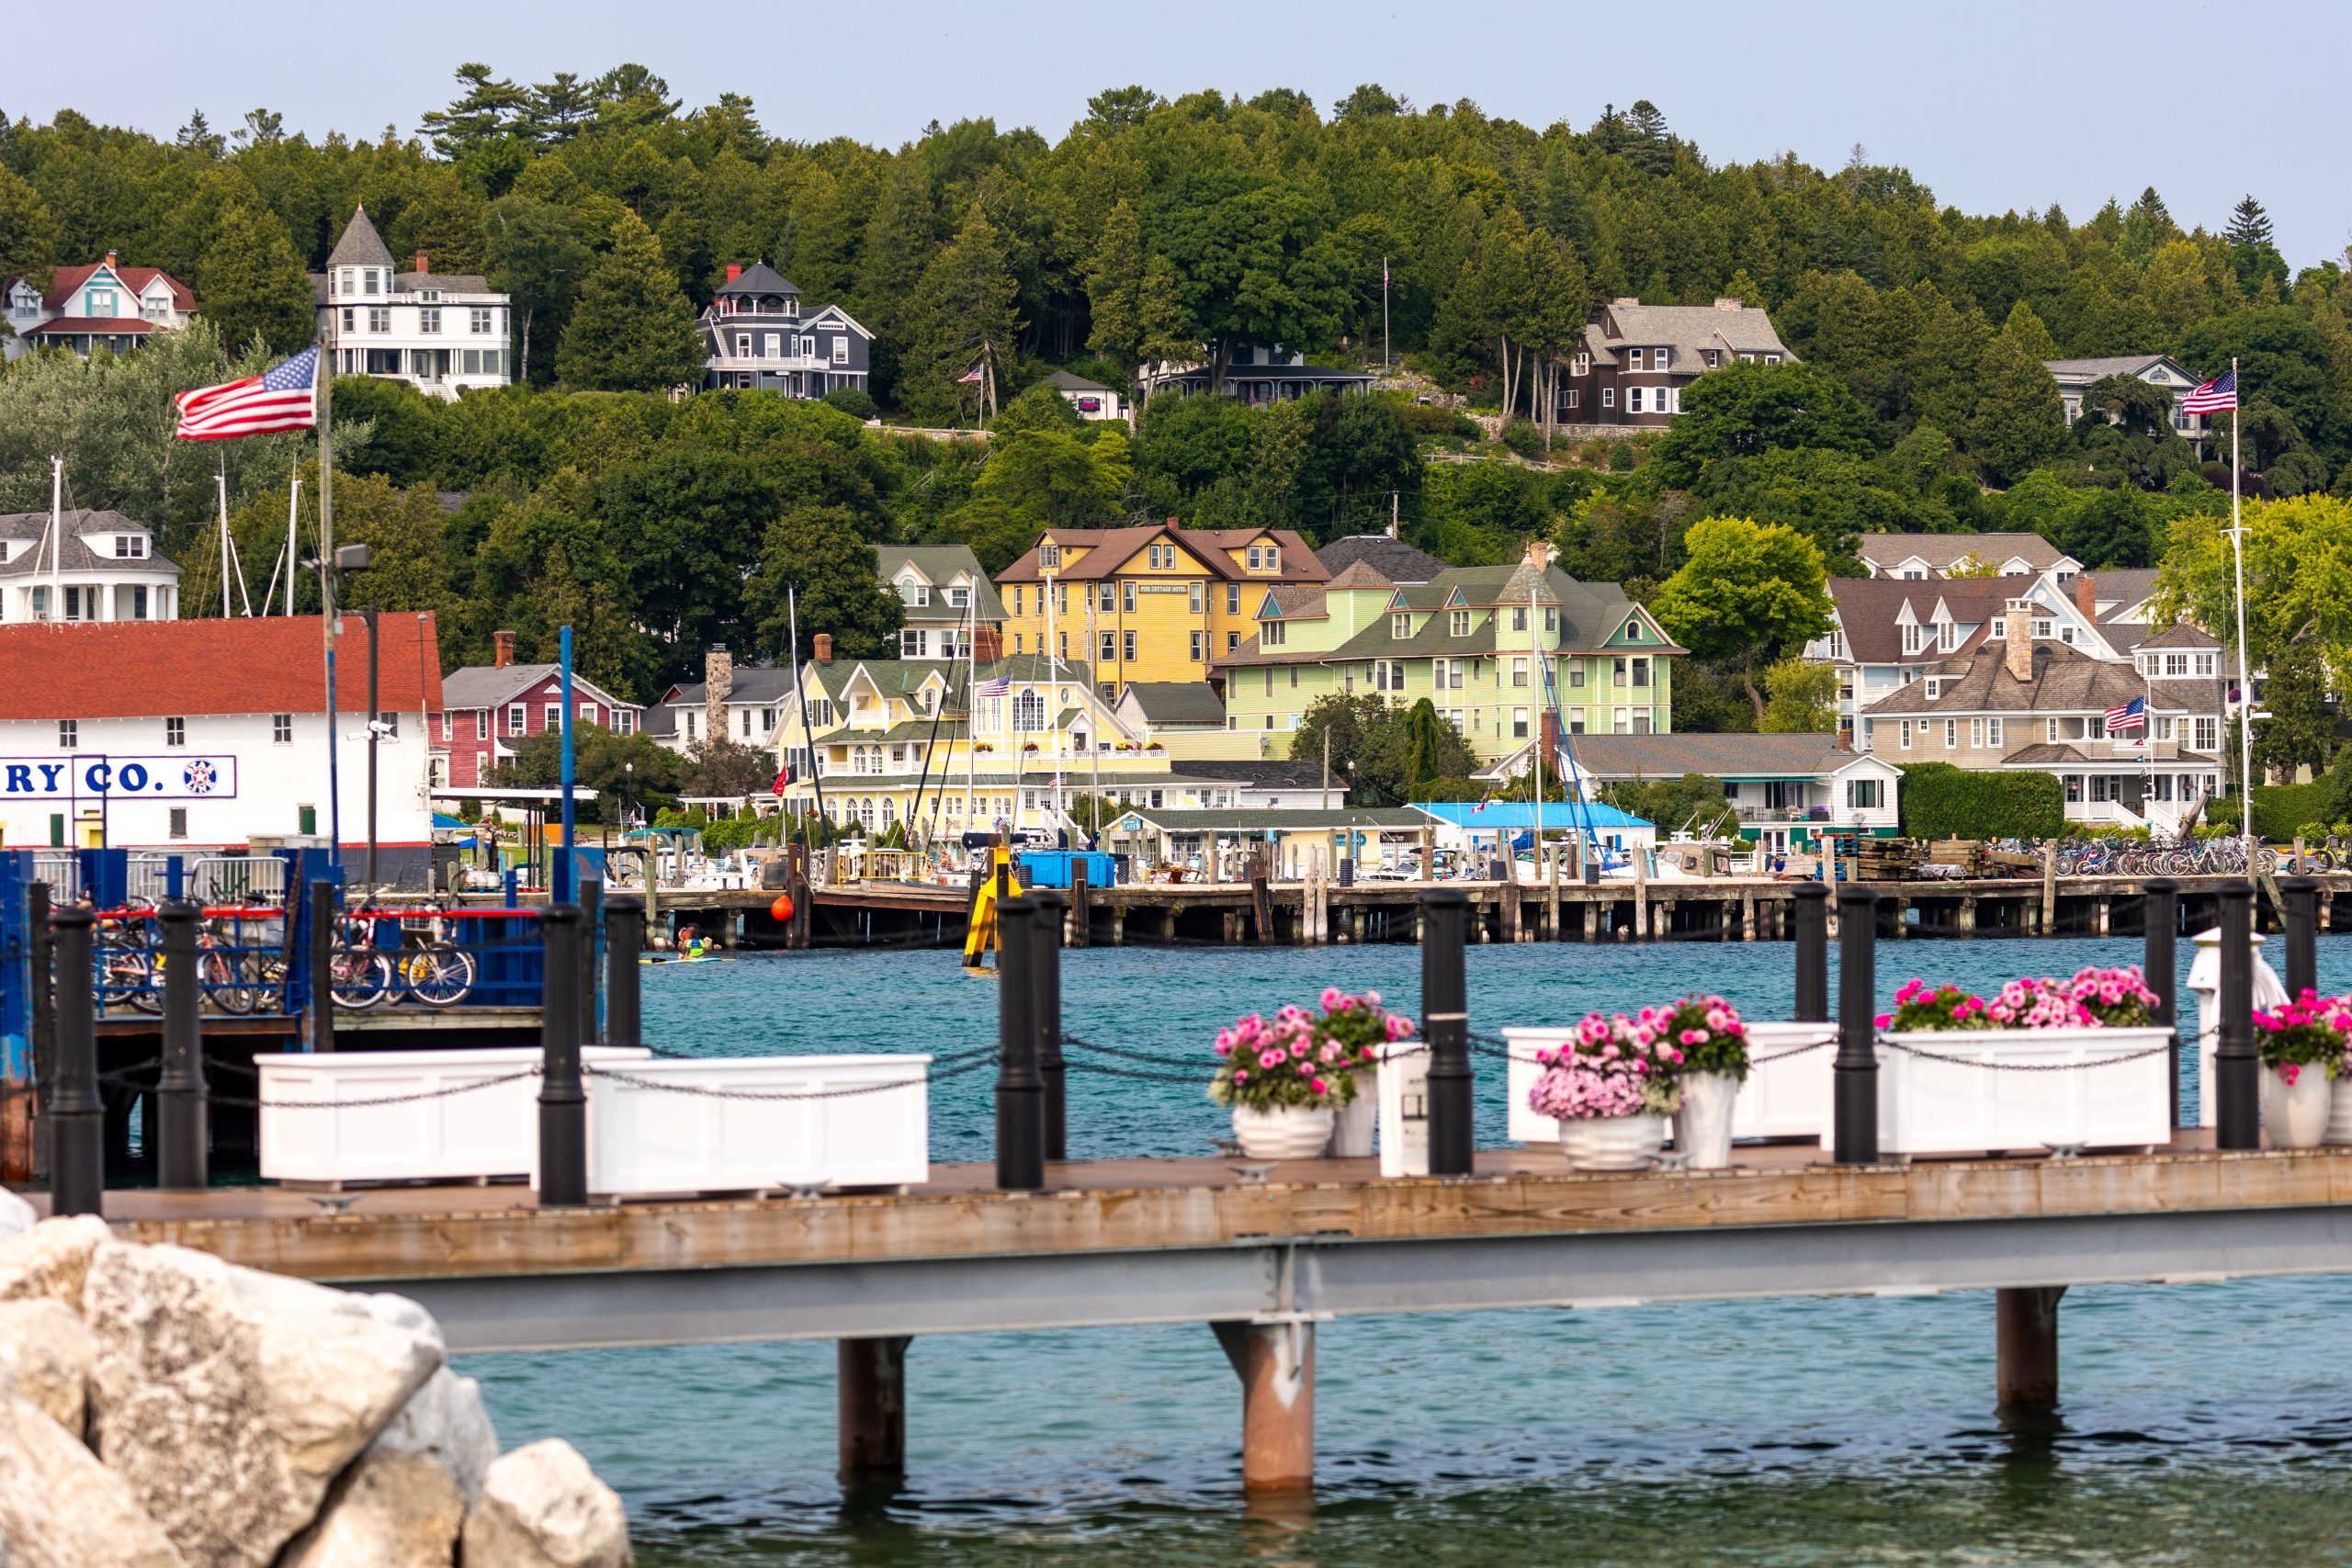 Pots of pink flowers sit on a Mackinac Island dock over the water with hotels and cottages on the bluff in the background